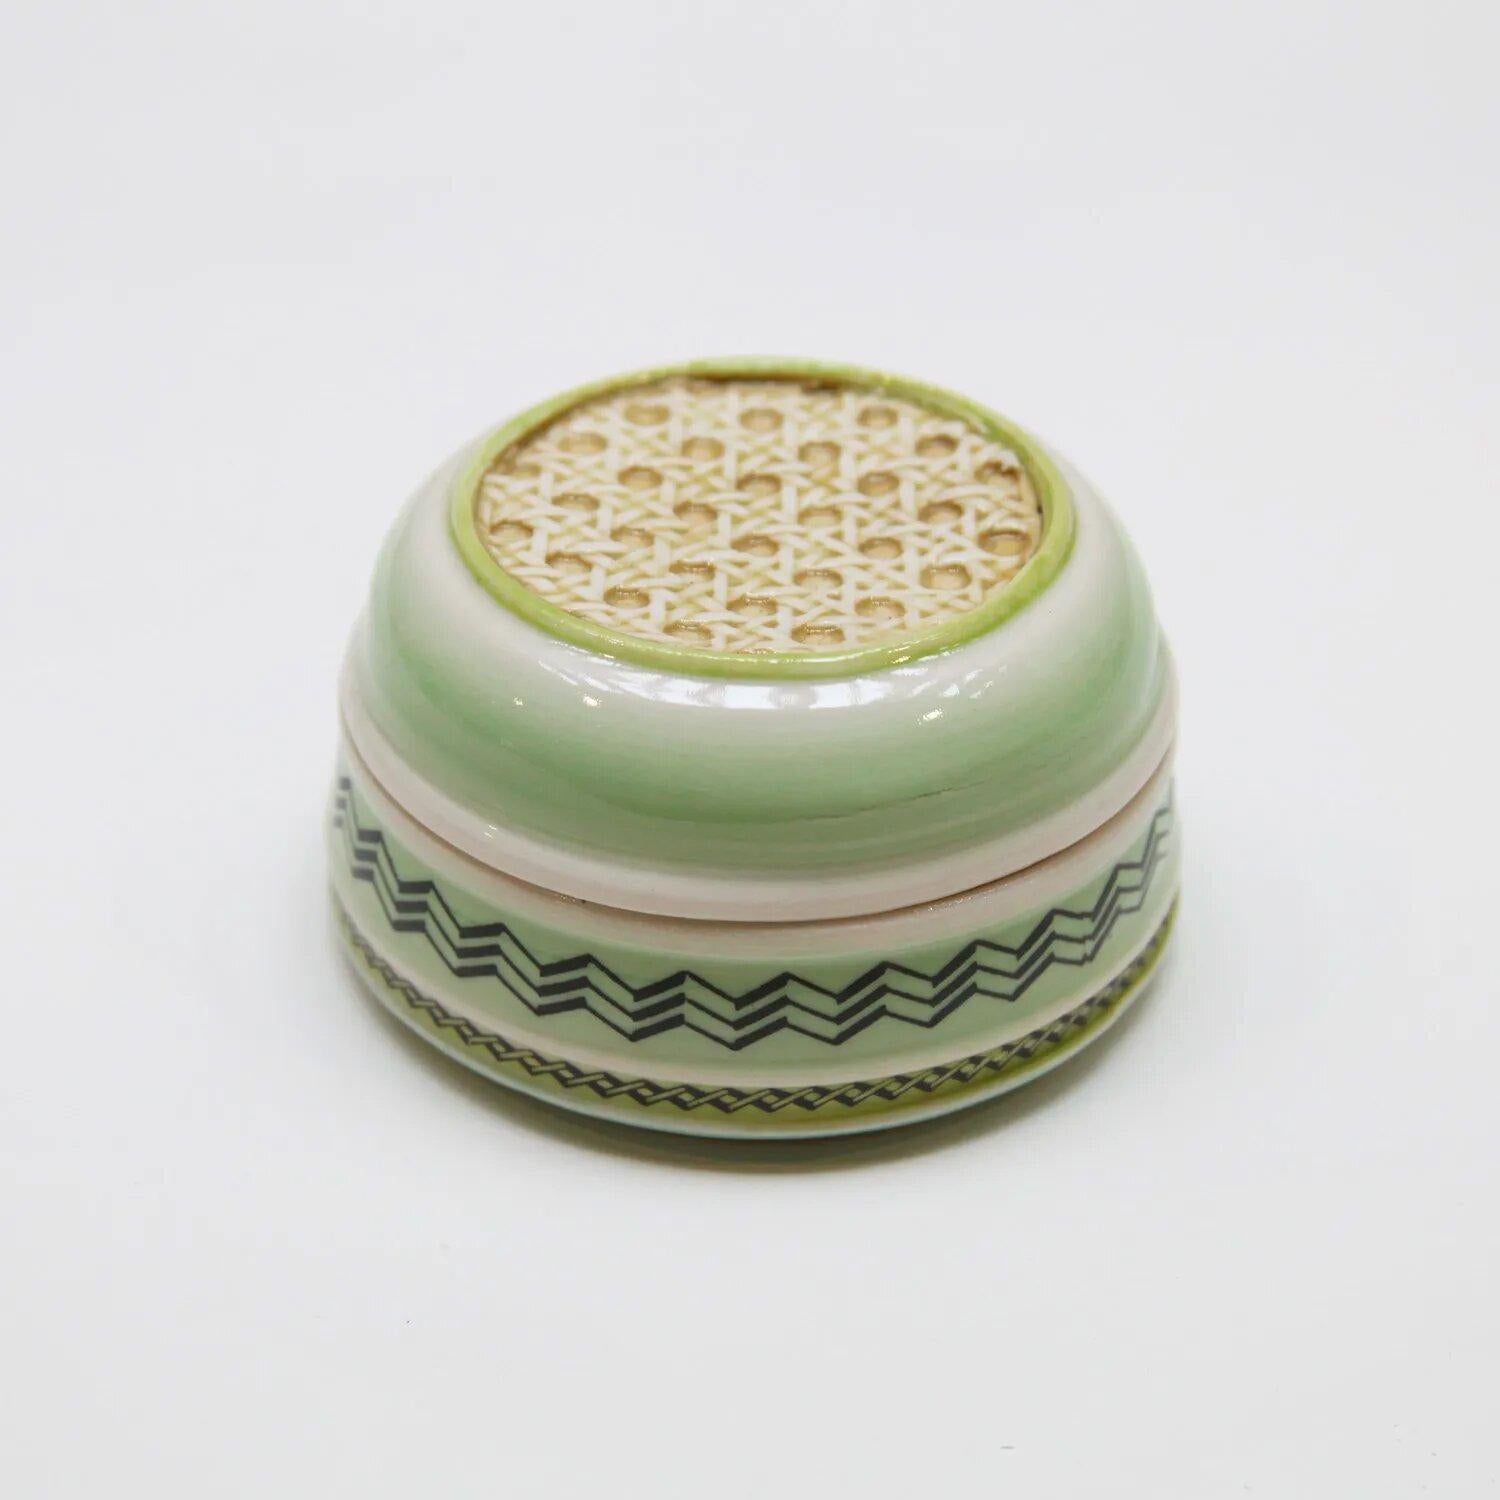 Ceramic Functional Zigzag Lidded Container - Art by Ron Carlson